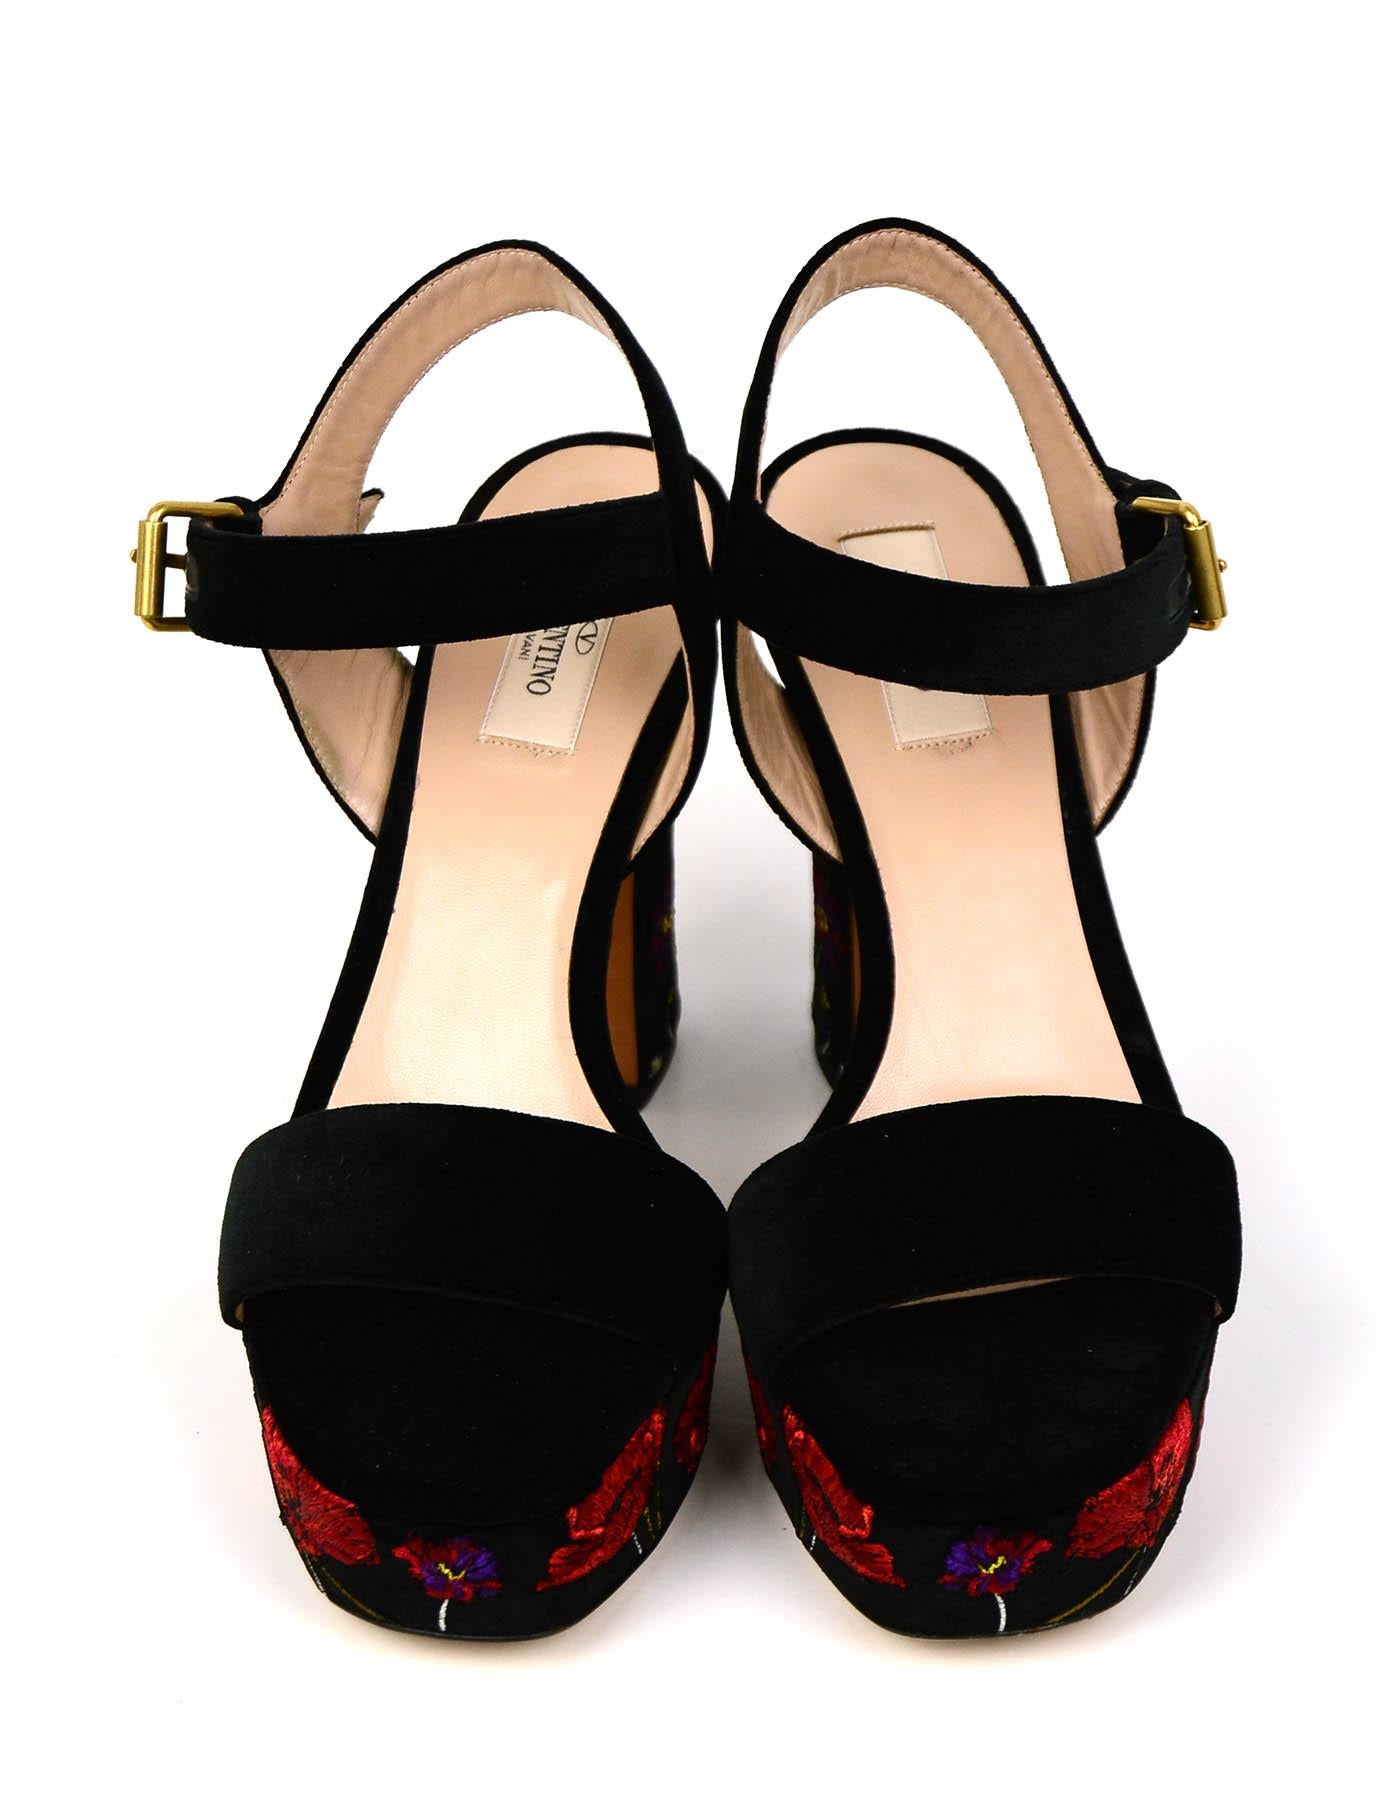 Valentino Garavani NEW Black Velvet Floral Embroidered Ankle Strap Sandals Sz 39.5

**Box and dustbag not included**

Made In: Italy
Color: Black, red
Hardware:Goldtone
Materials: Velvet
Closure/Opening: Buckle
Overall Condition: Excellent,